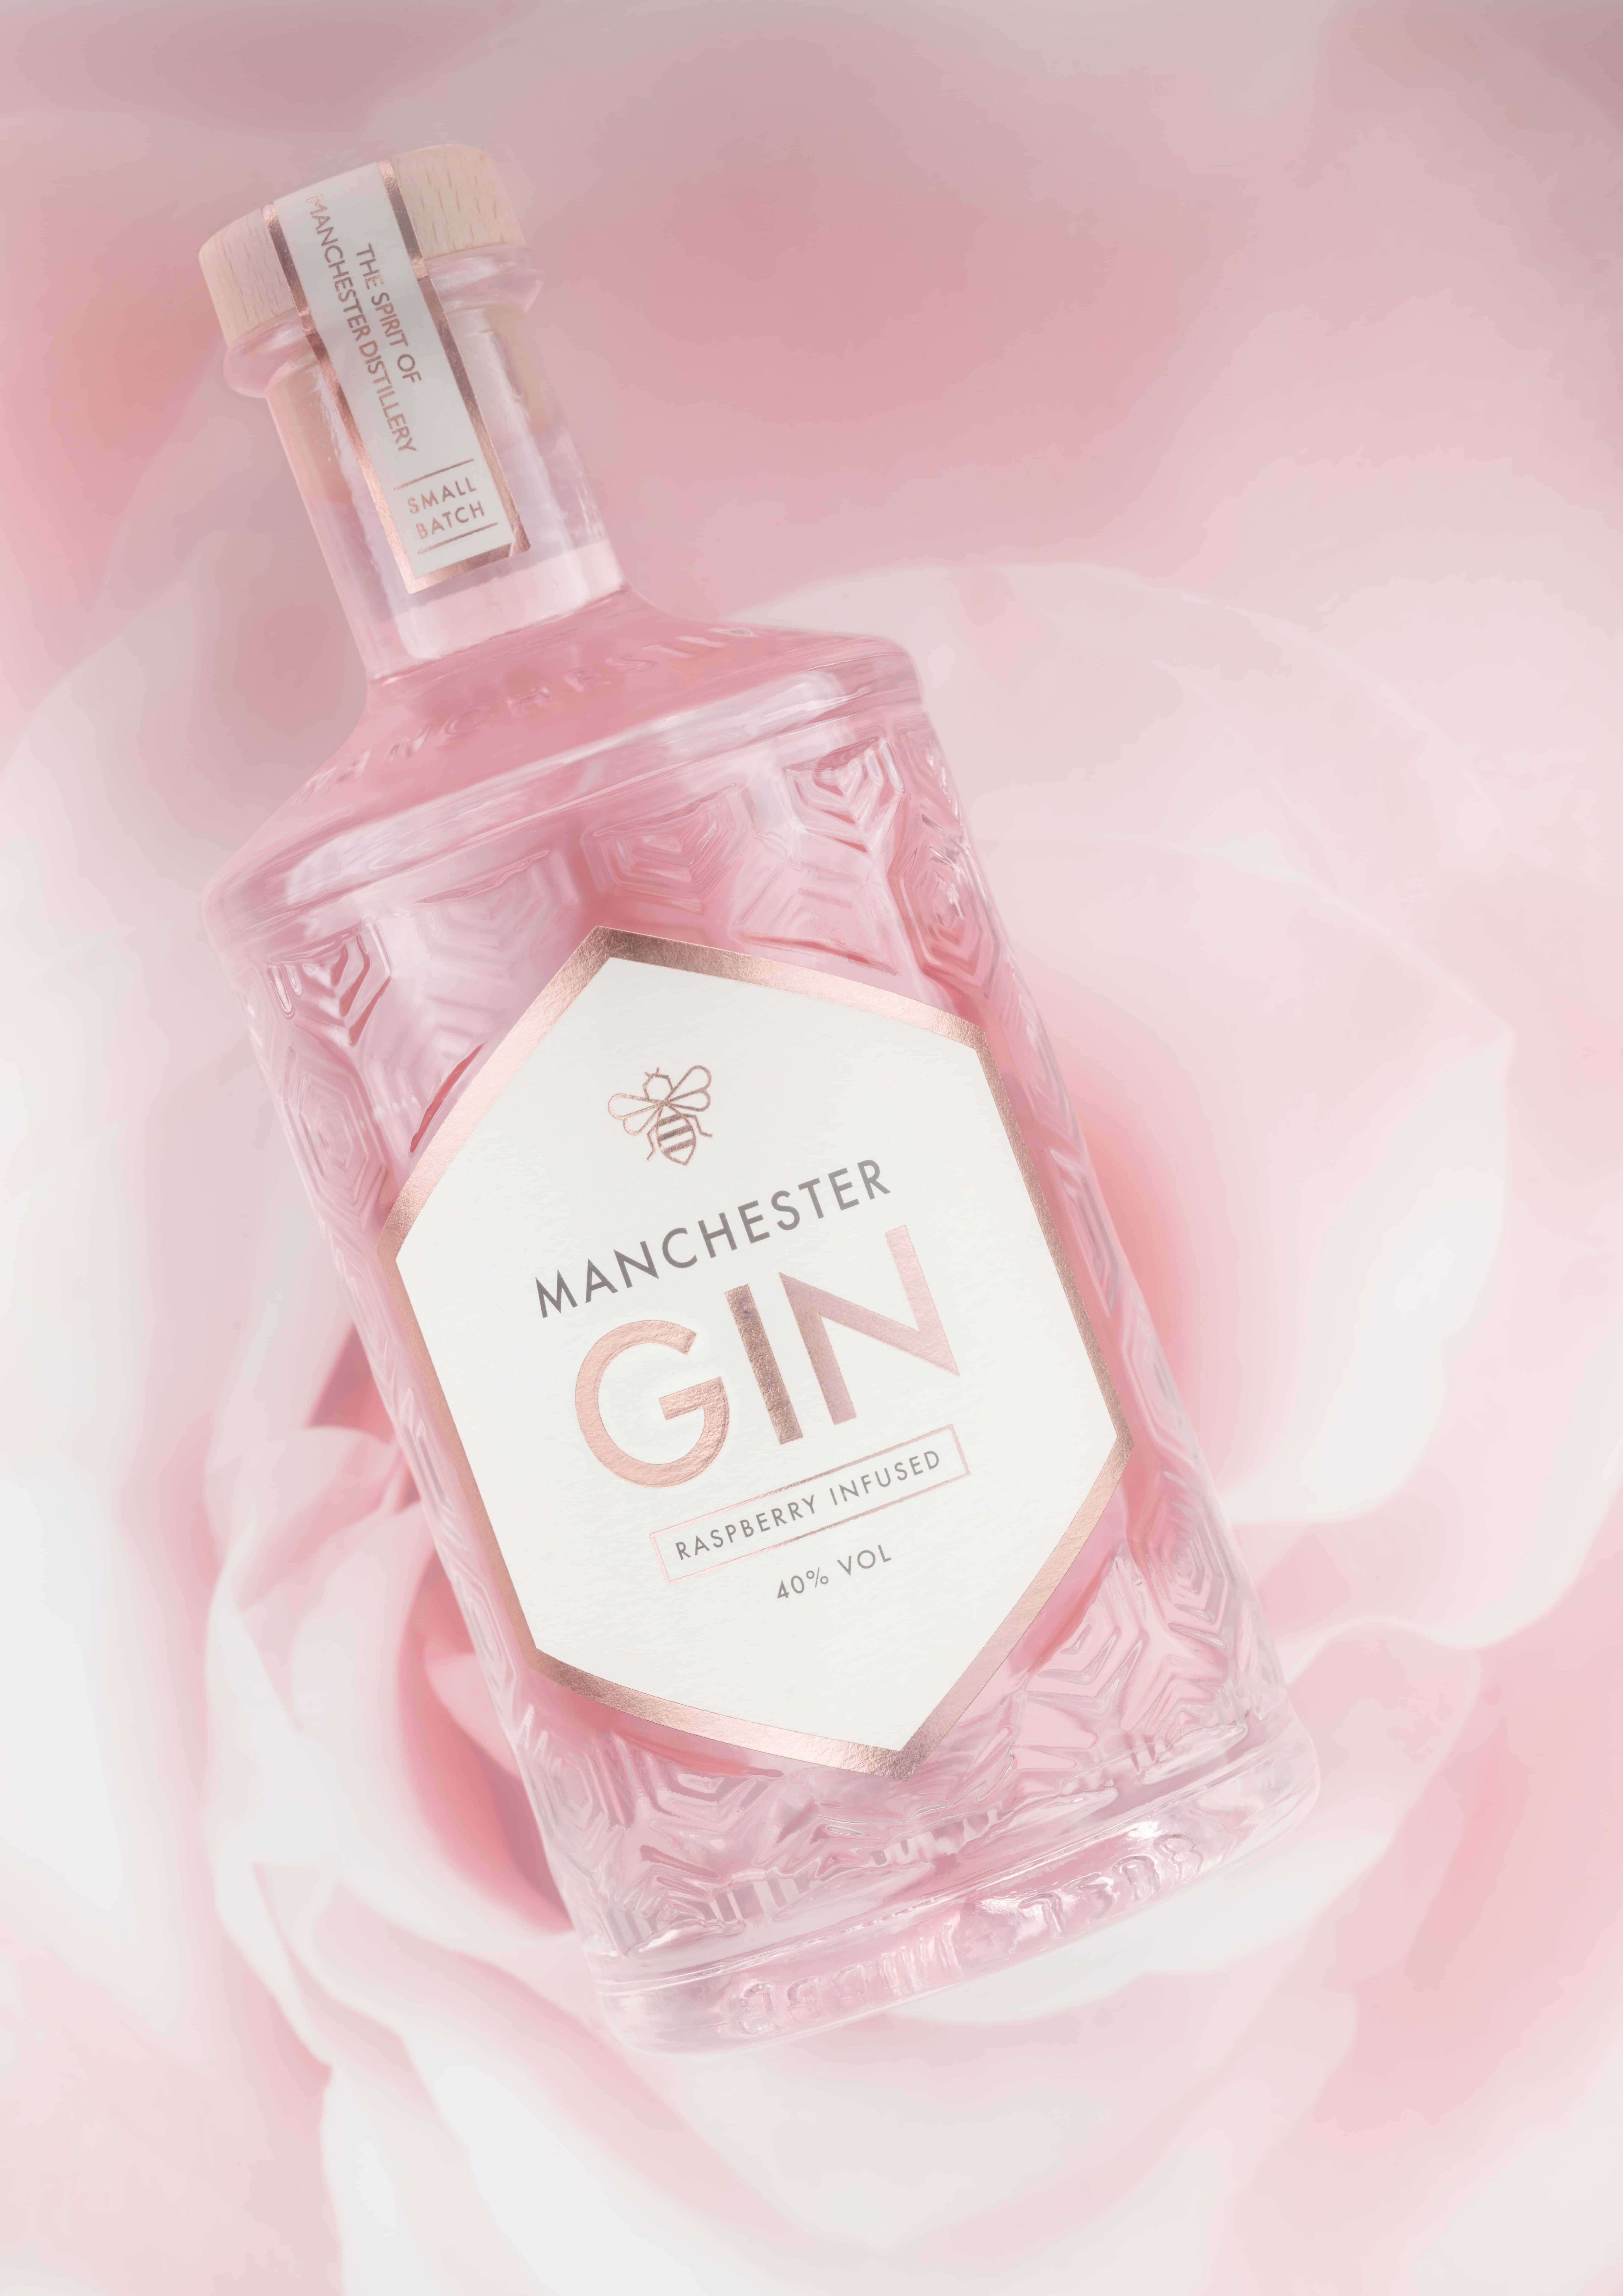 Manchester pink gin bottle laying on top of a pink rose.